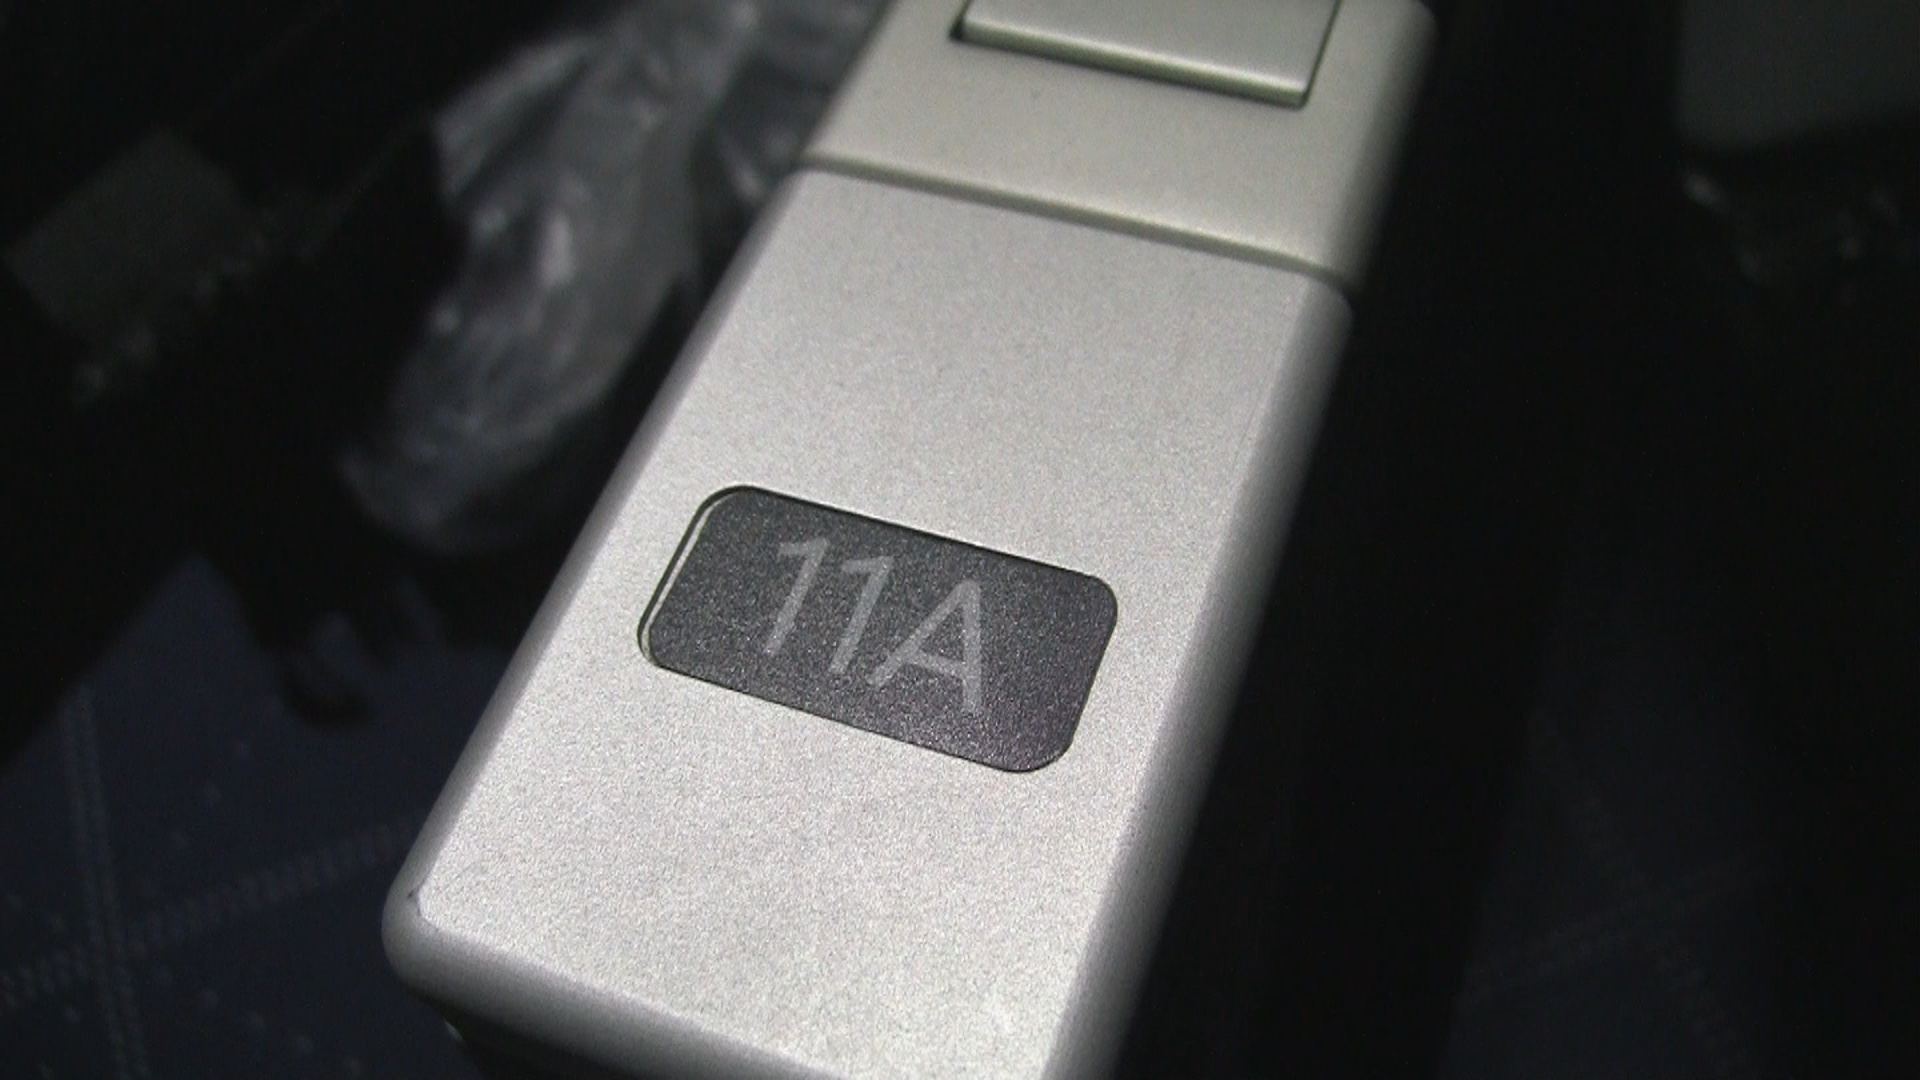 Seat 11A number printed in armrest.